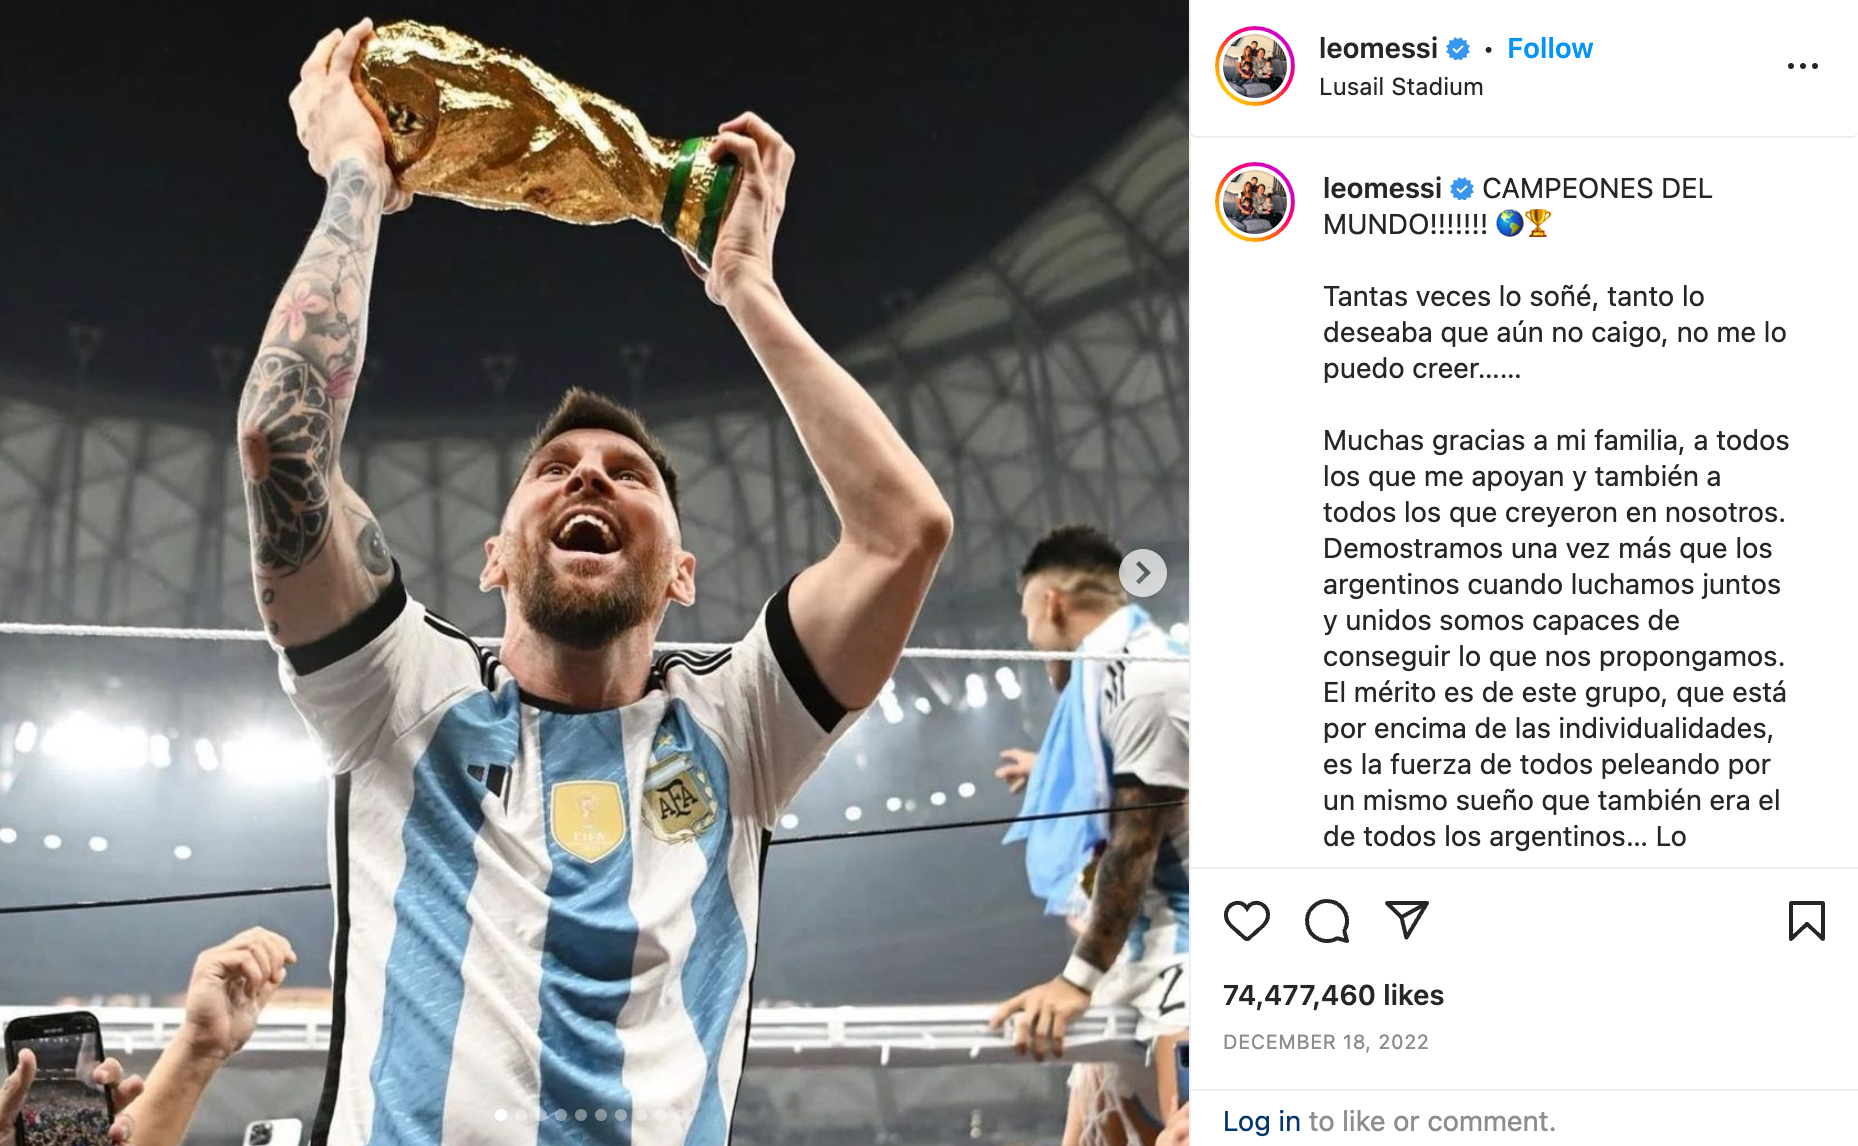 Lionel Messi unknowingly lifted FAKE World Cup trophy in record Instagram  photo